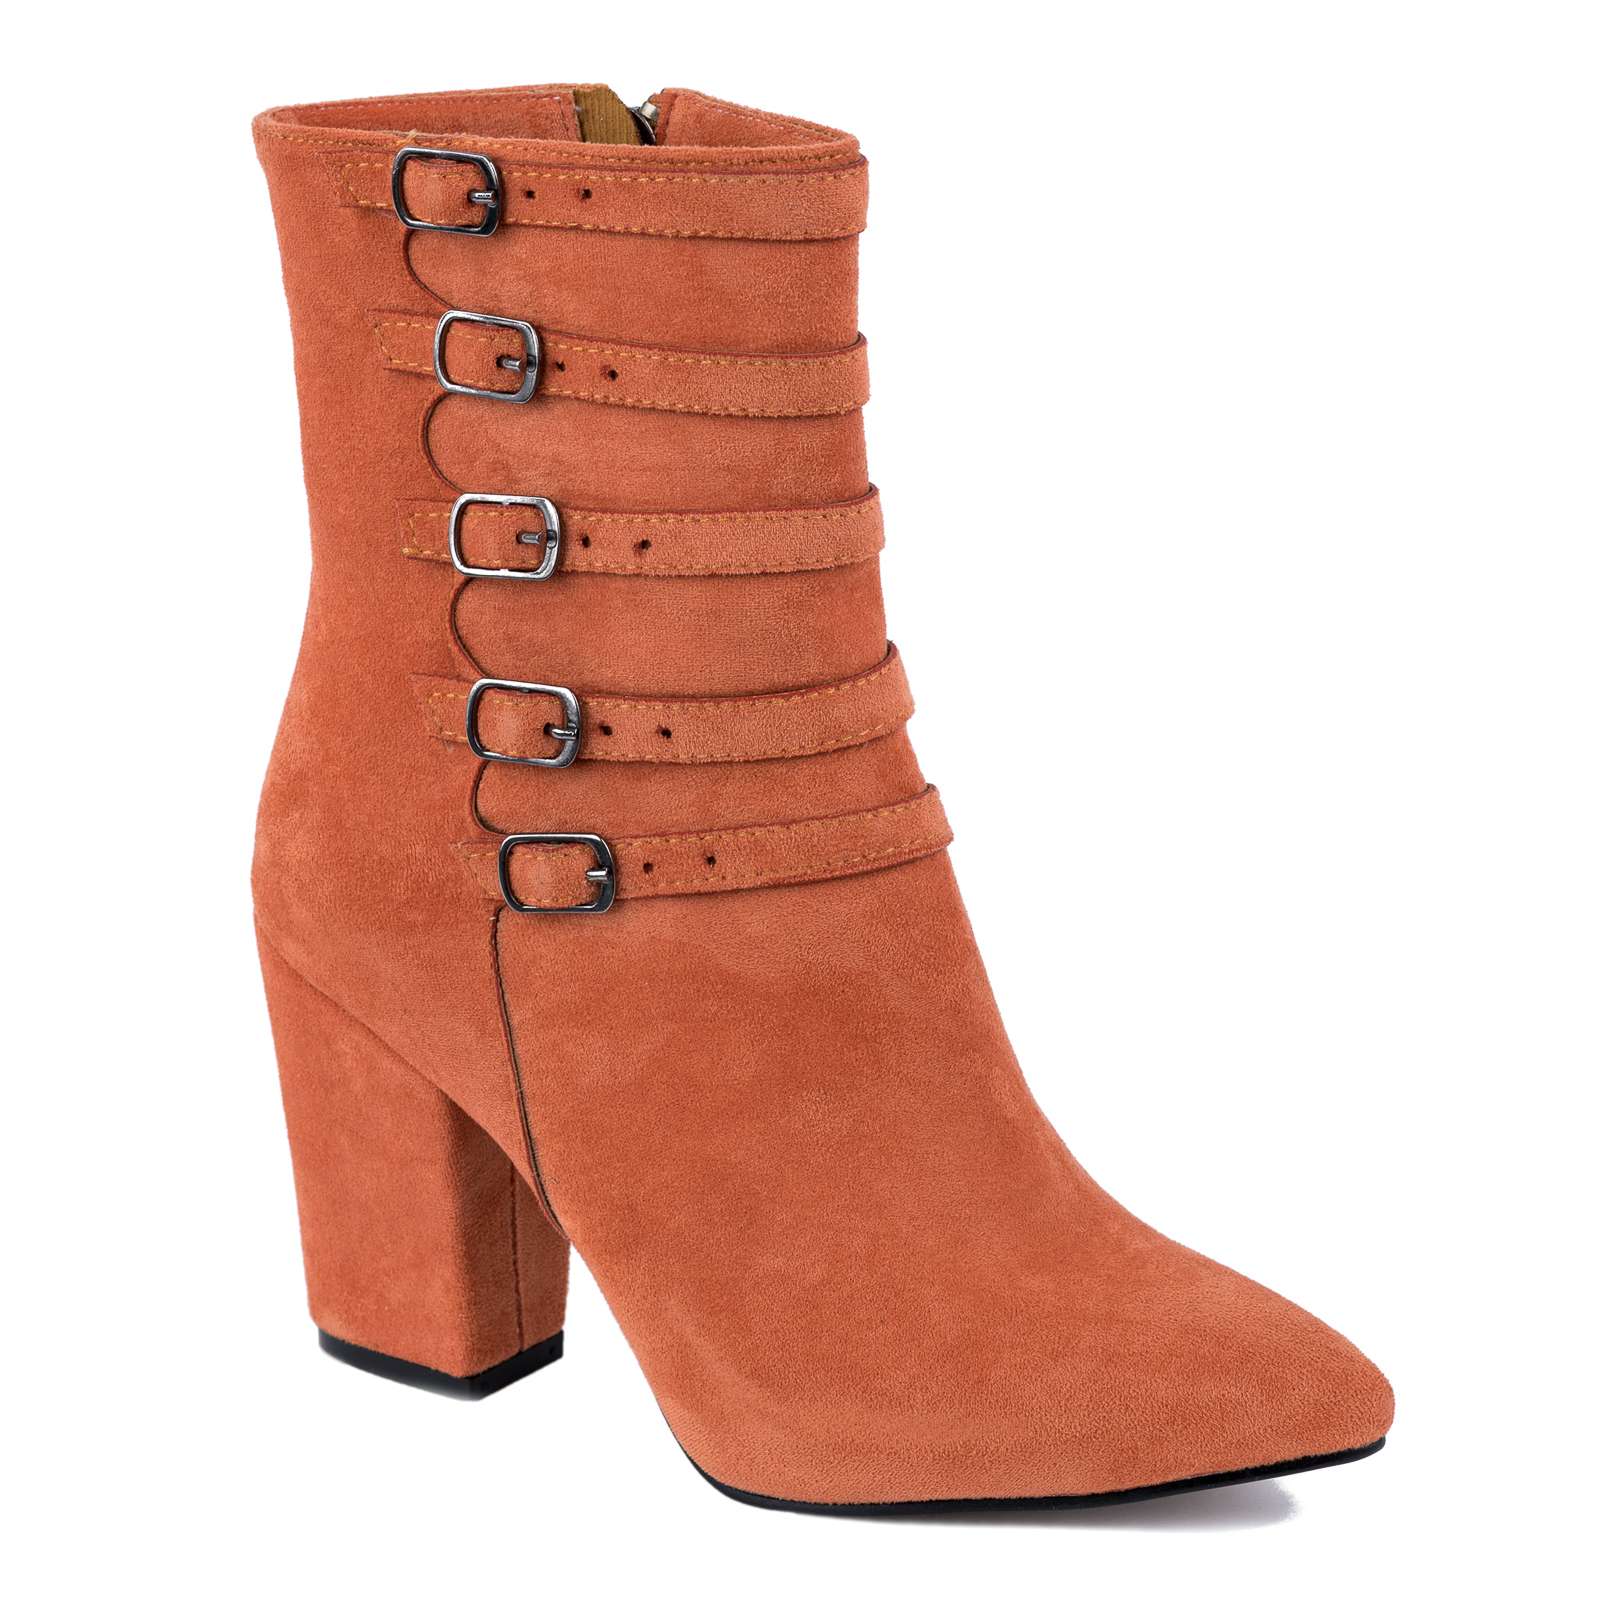 VELOUR ANKLE BOOTS WITH BELTS AND BLOCK HEEL - ORANGE